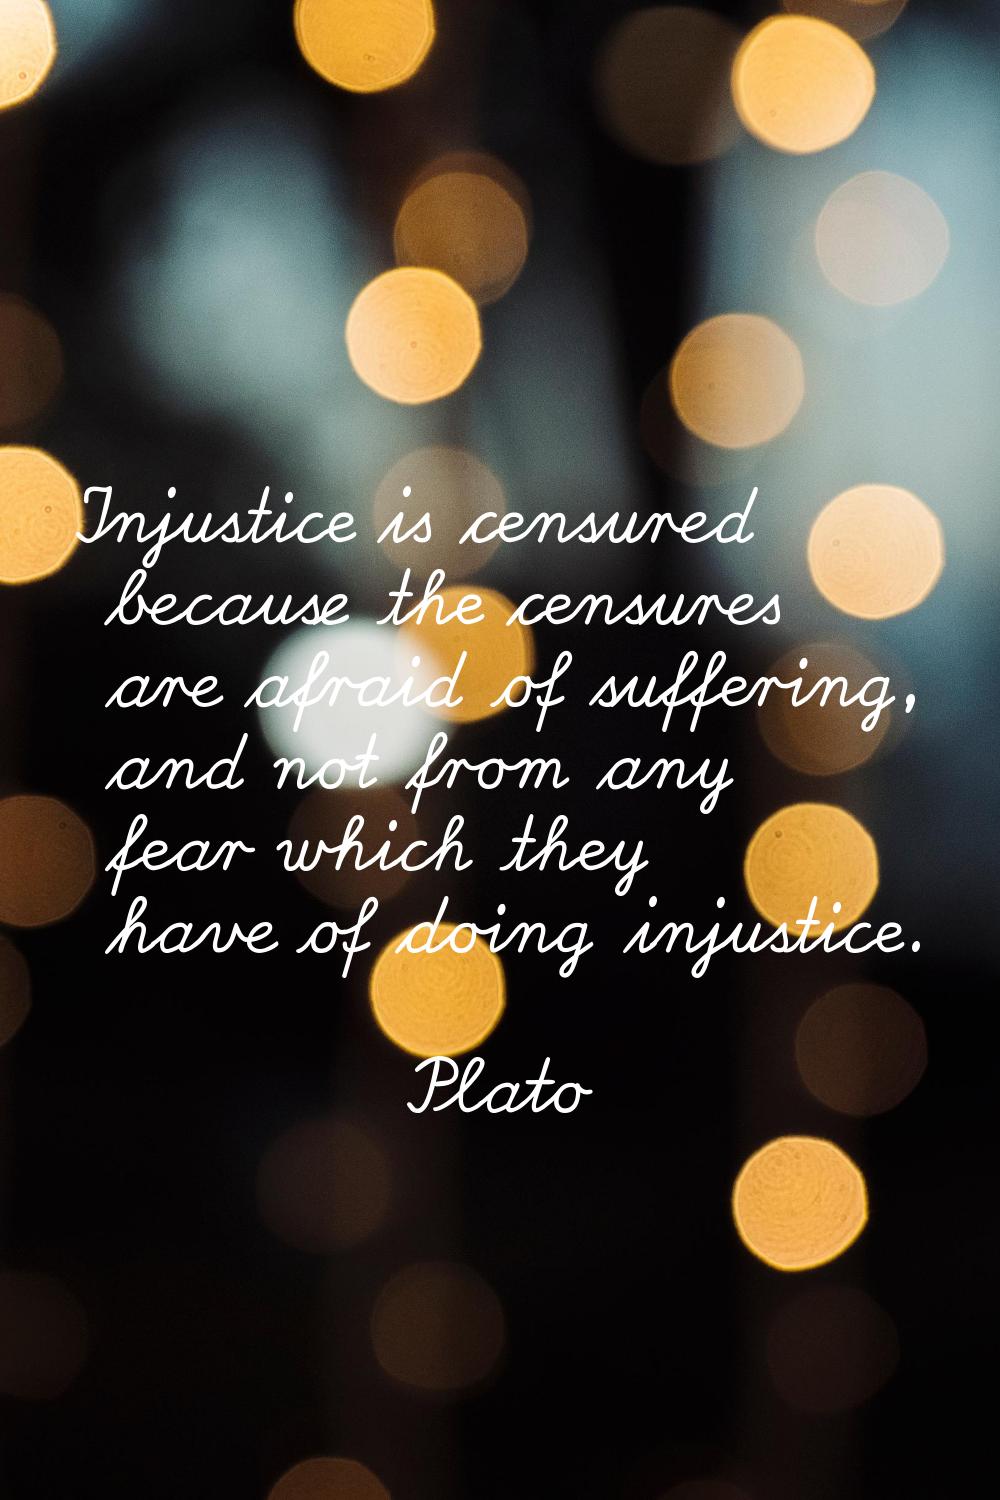 Injustice is censured because the censures are afraid of suffering, and not from any fear which the